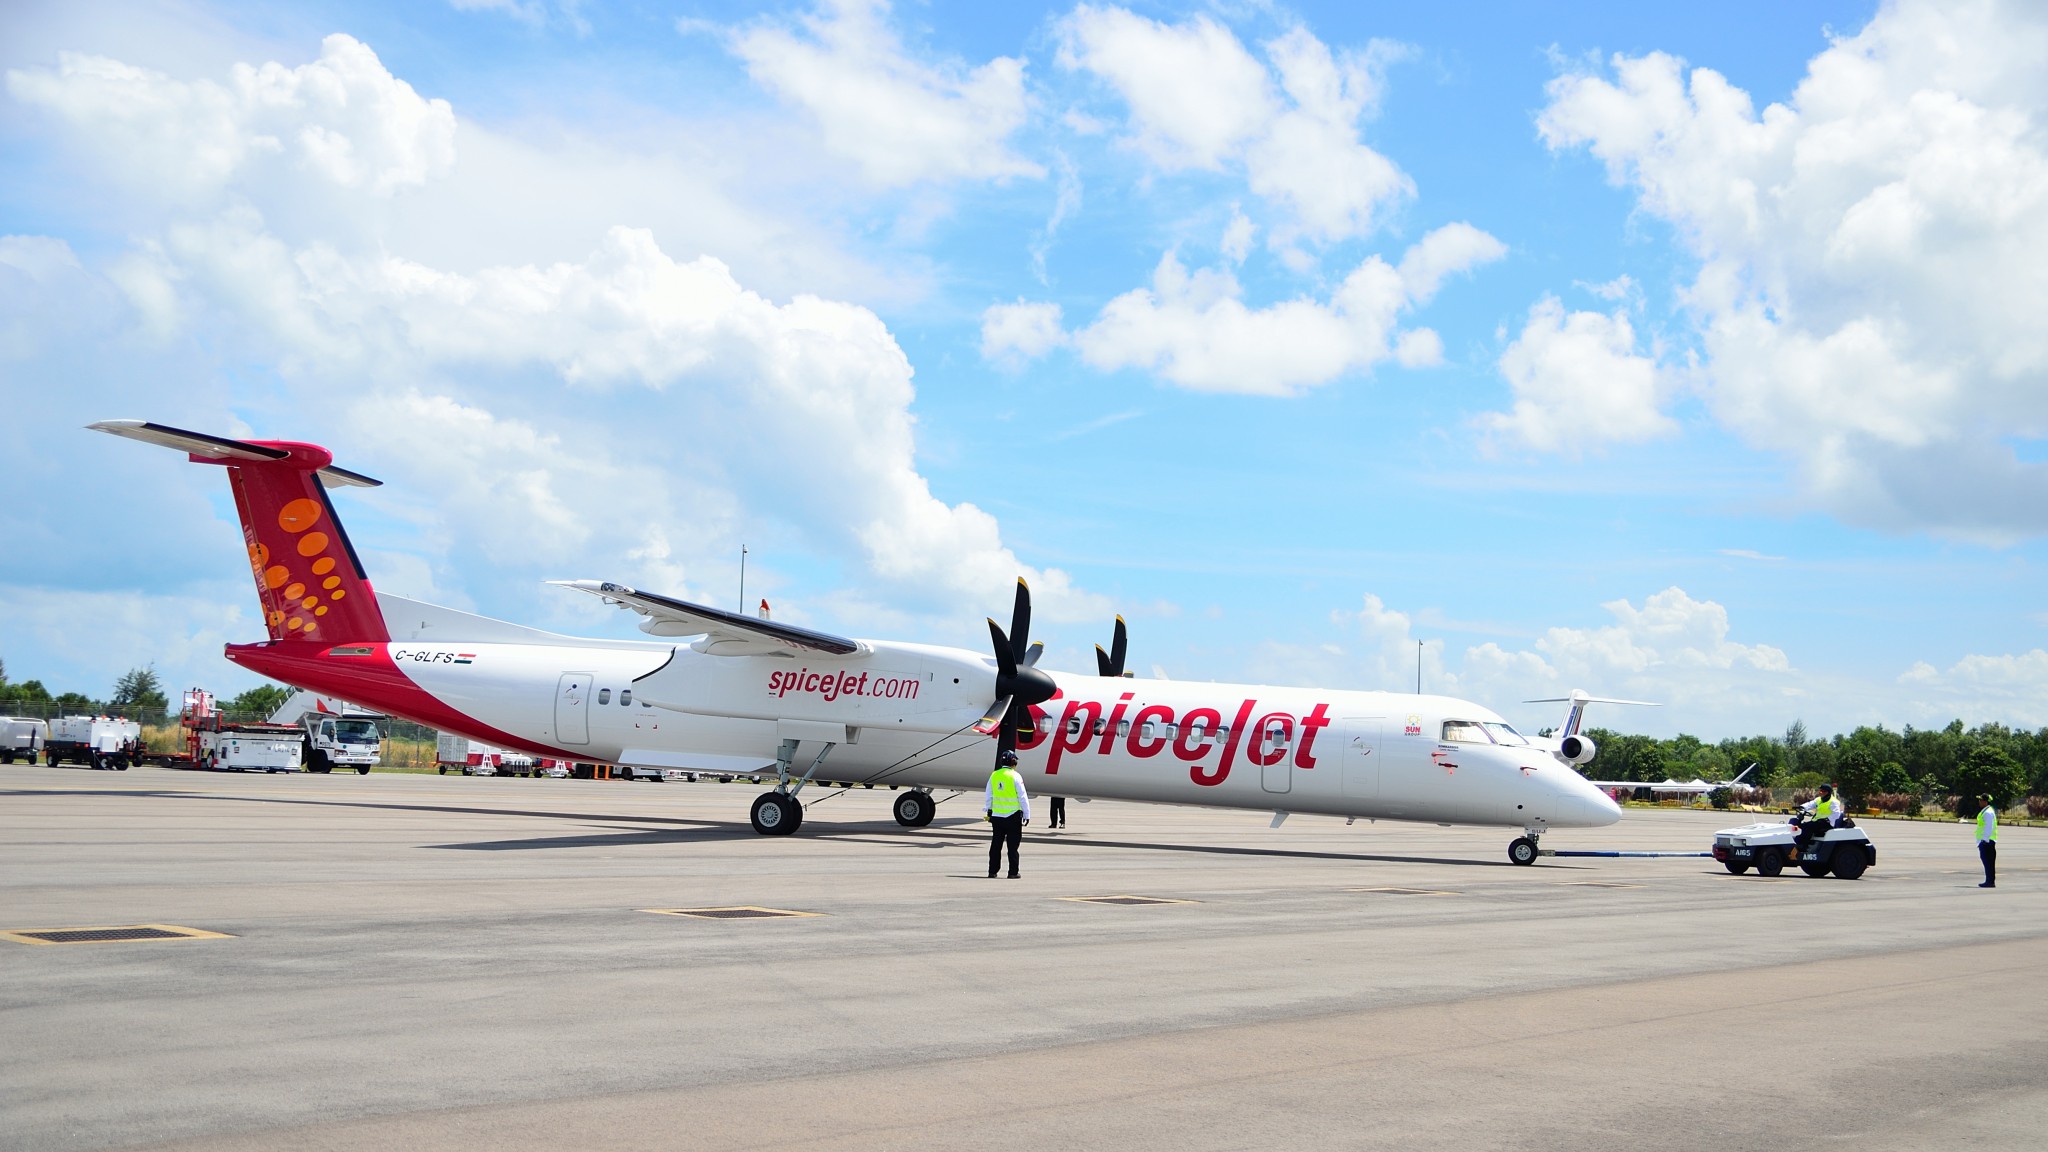 SpiceJet wet leases two Airbus A320 airplanes